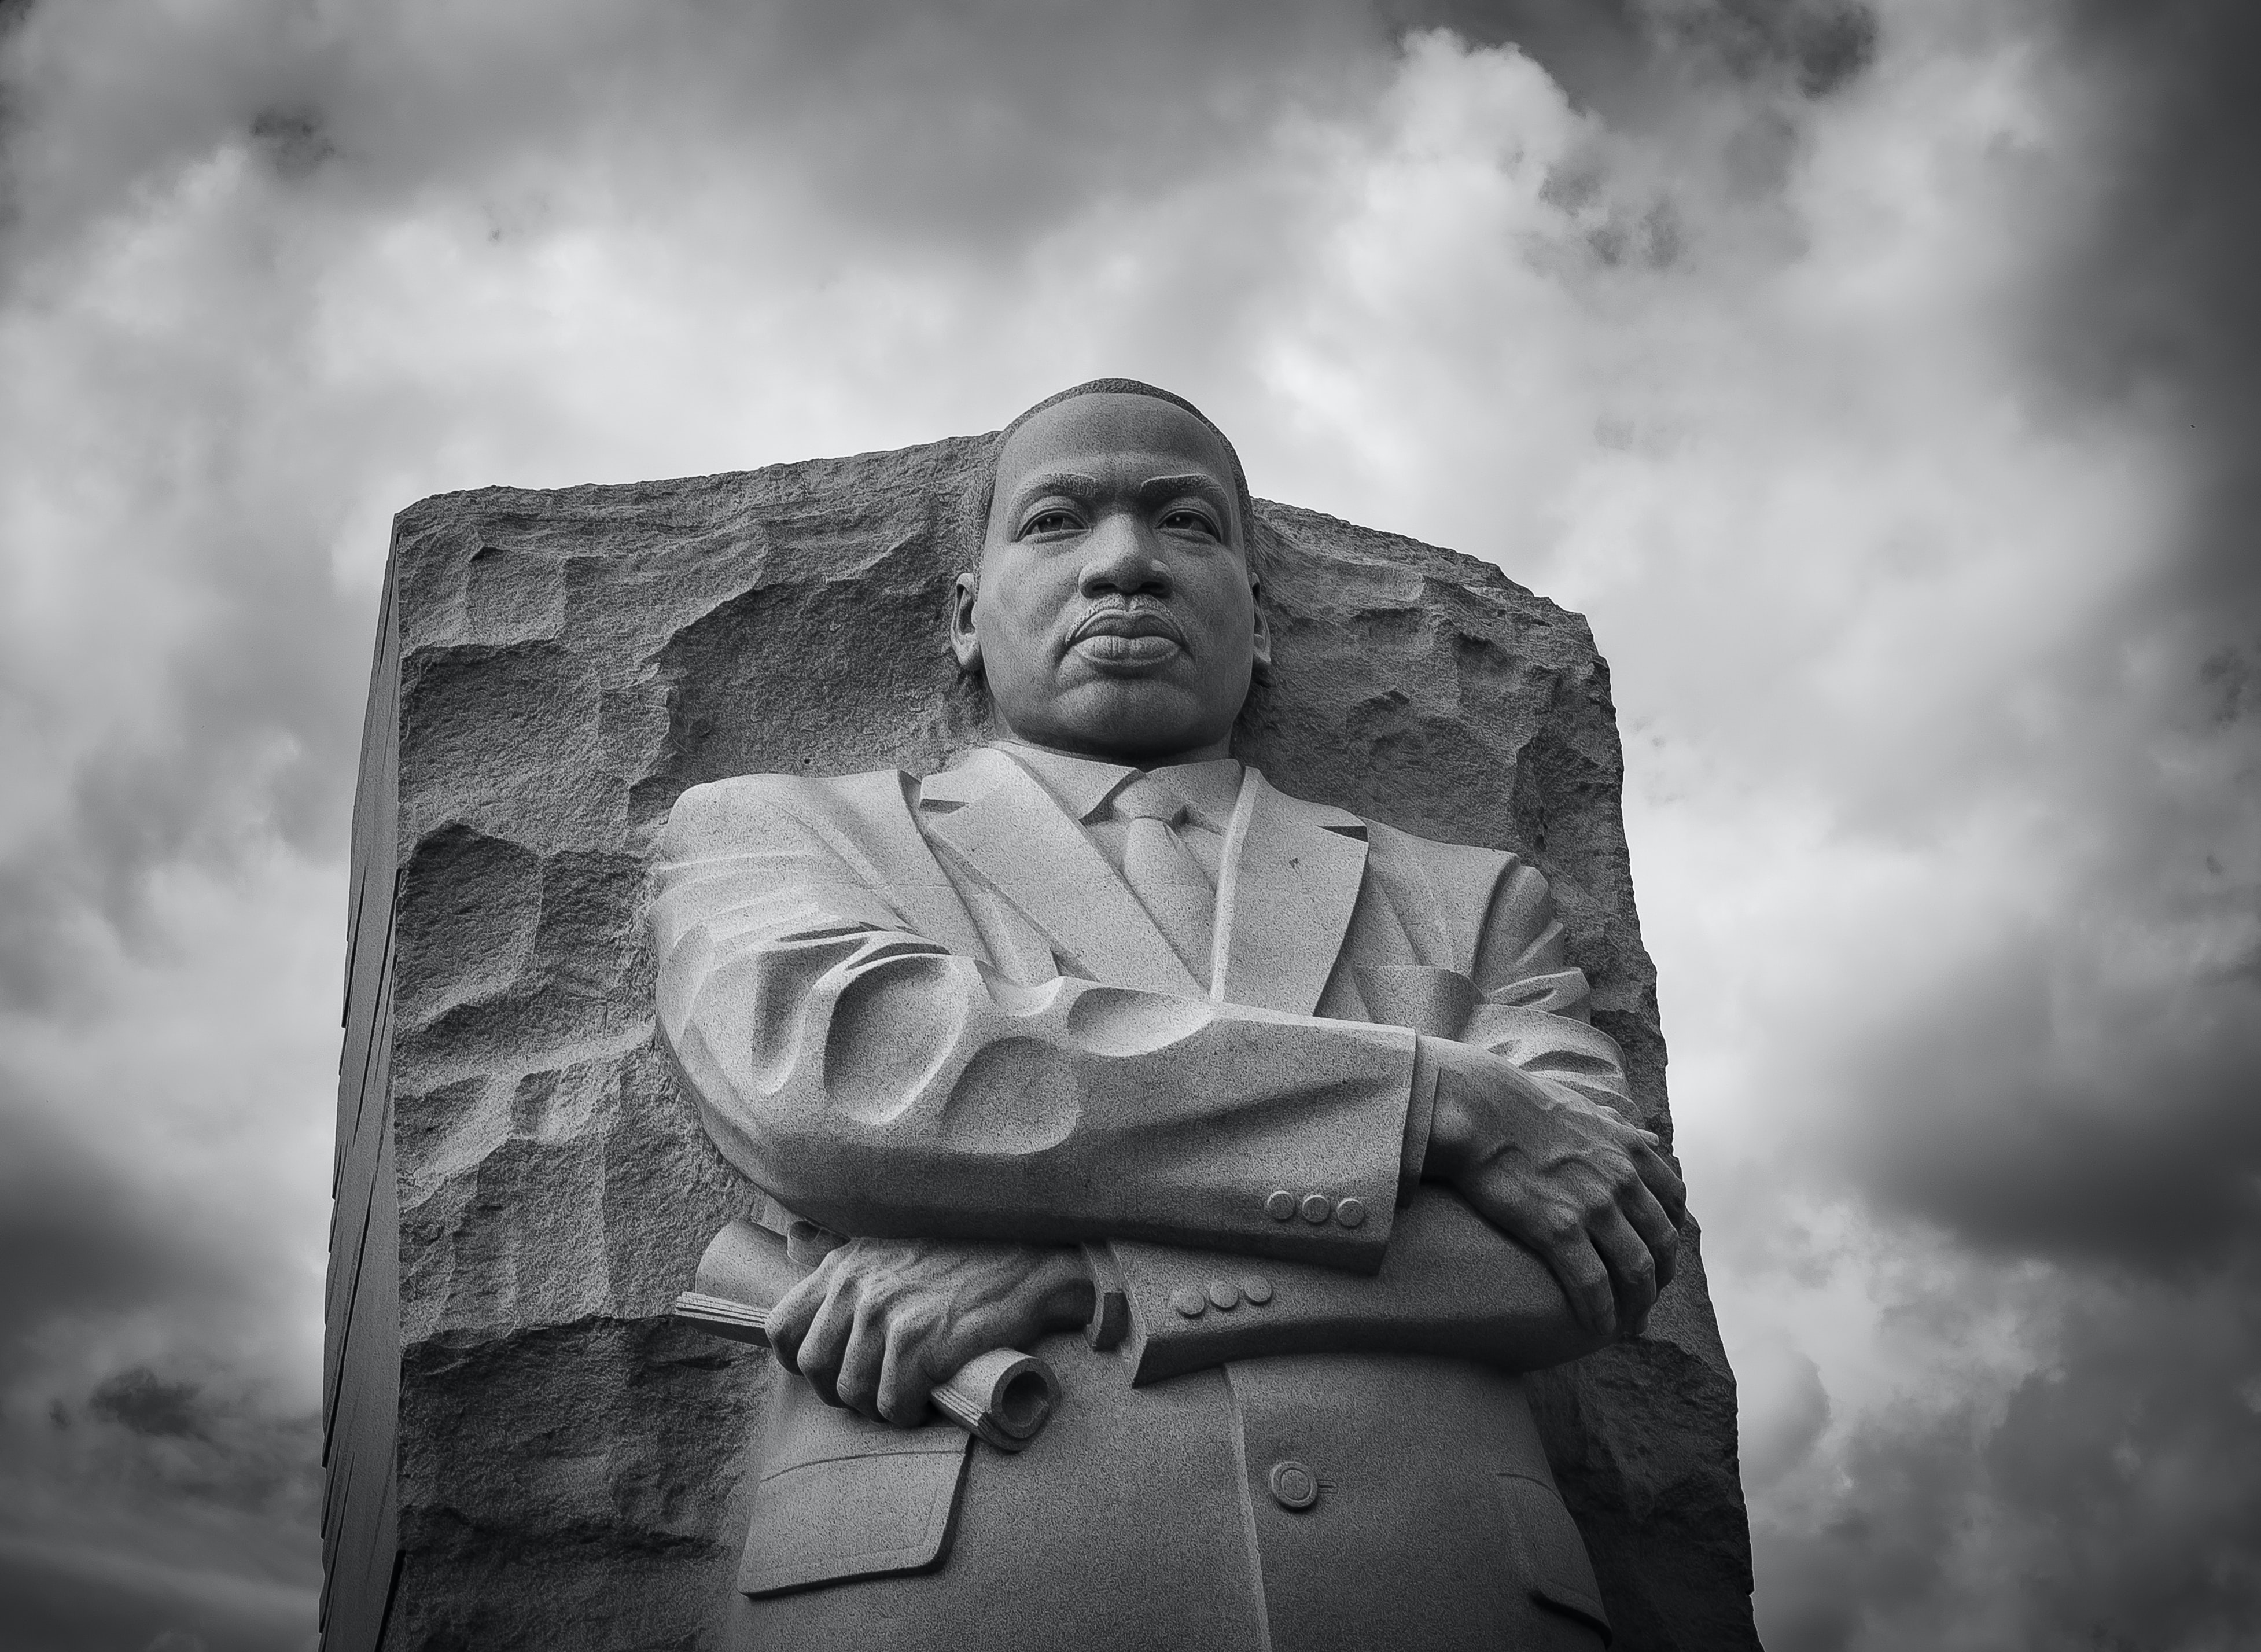 The Martin Luther King, Jr. Memorial 